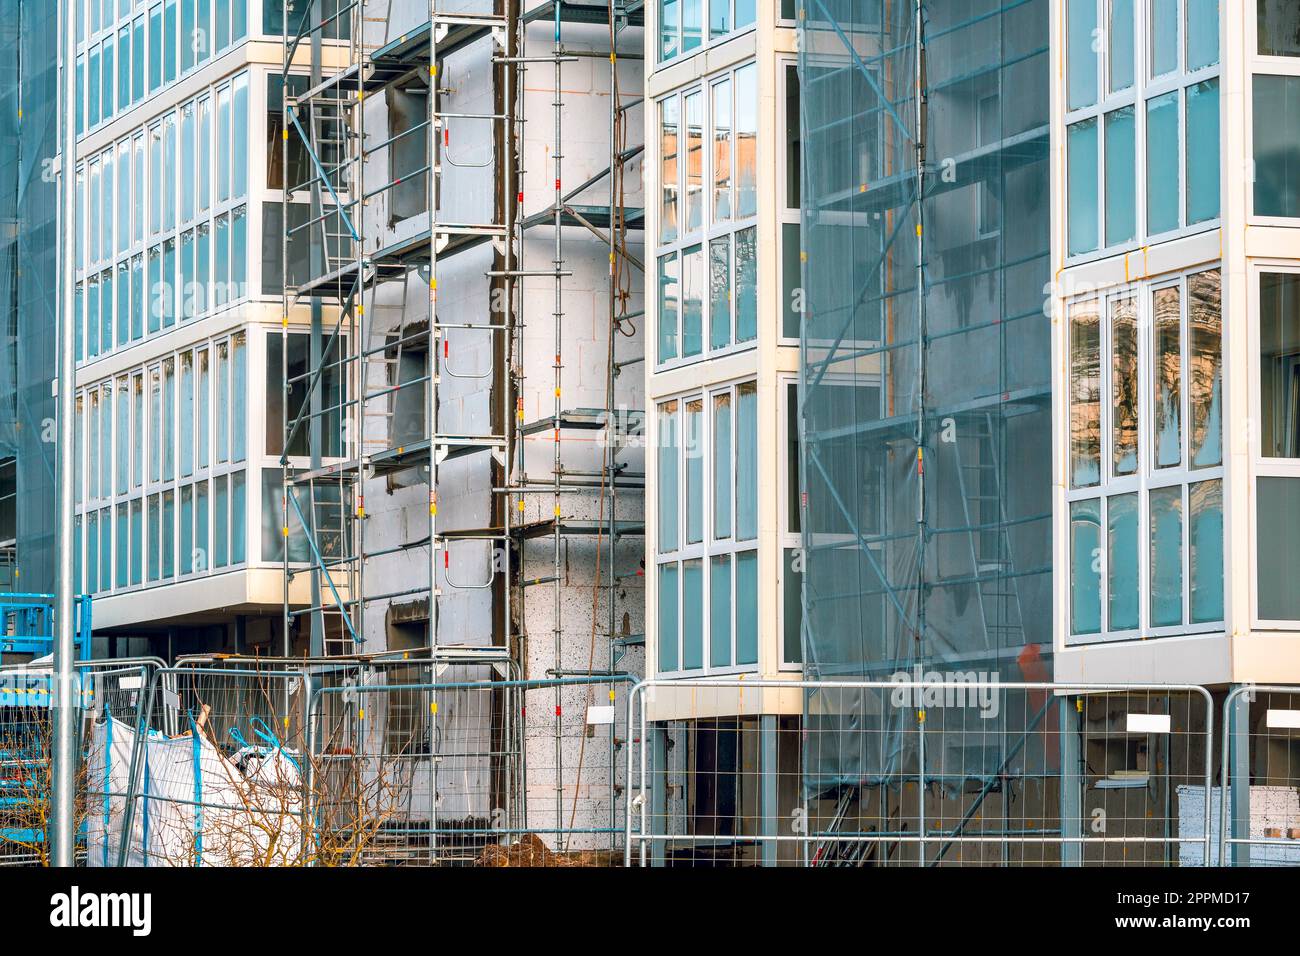 High-rise, facade of multi-story building under construction Stock Photo